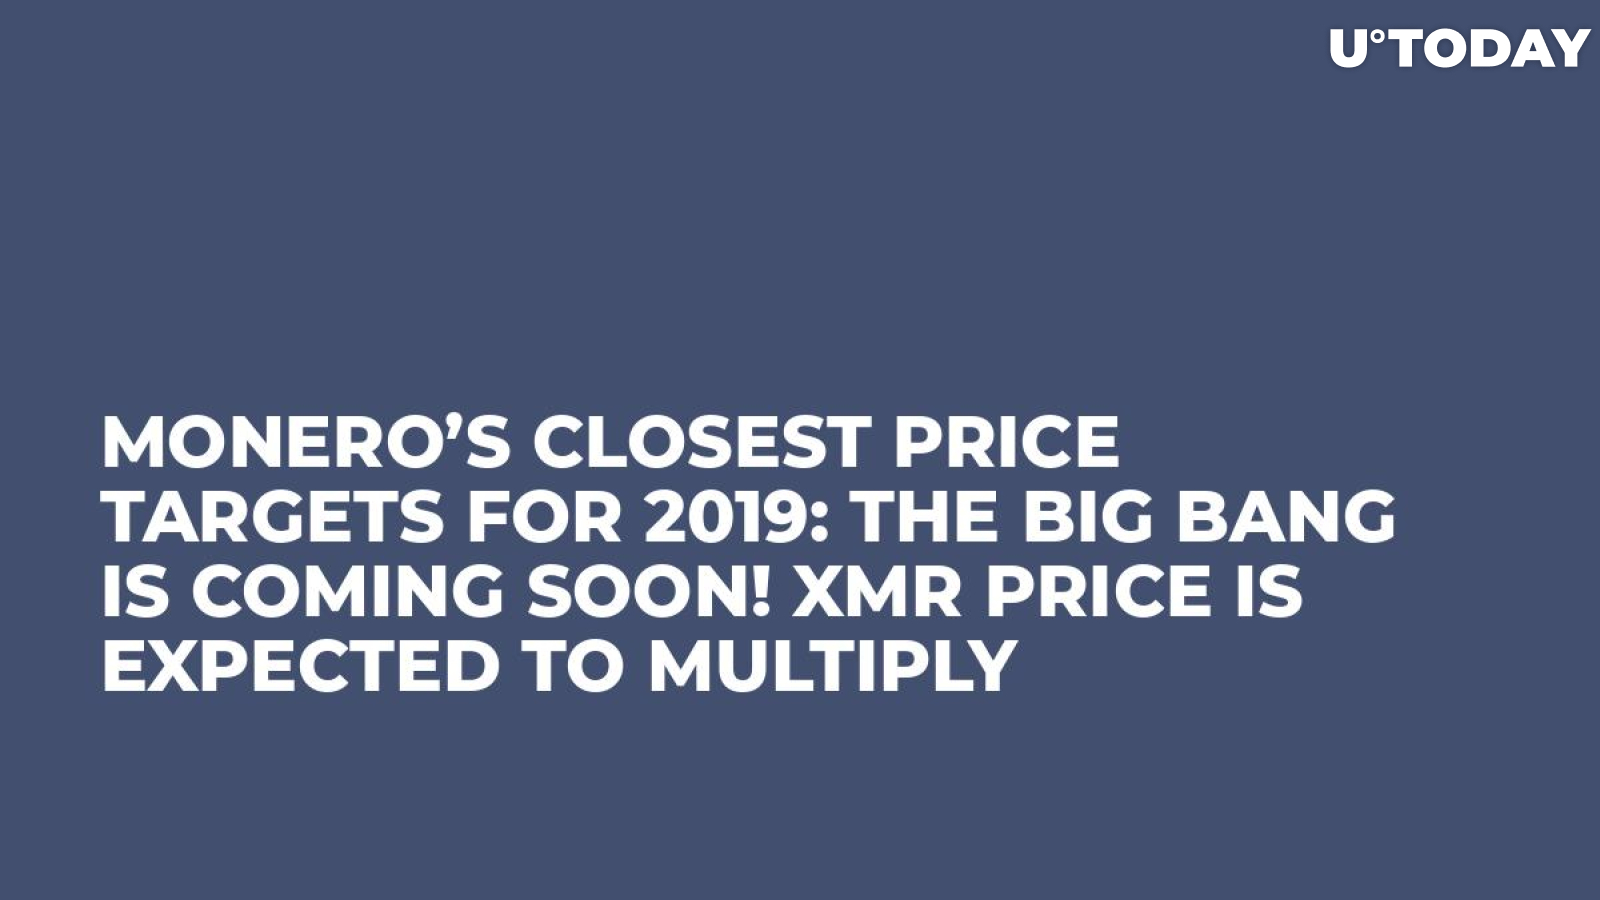 Monero’s Closest Price Targets for 2019: The Big Bang Is Coming Soon! XMR Price Is Expected to Multiply